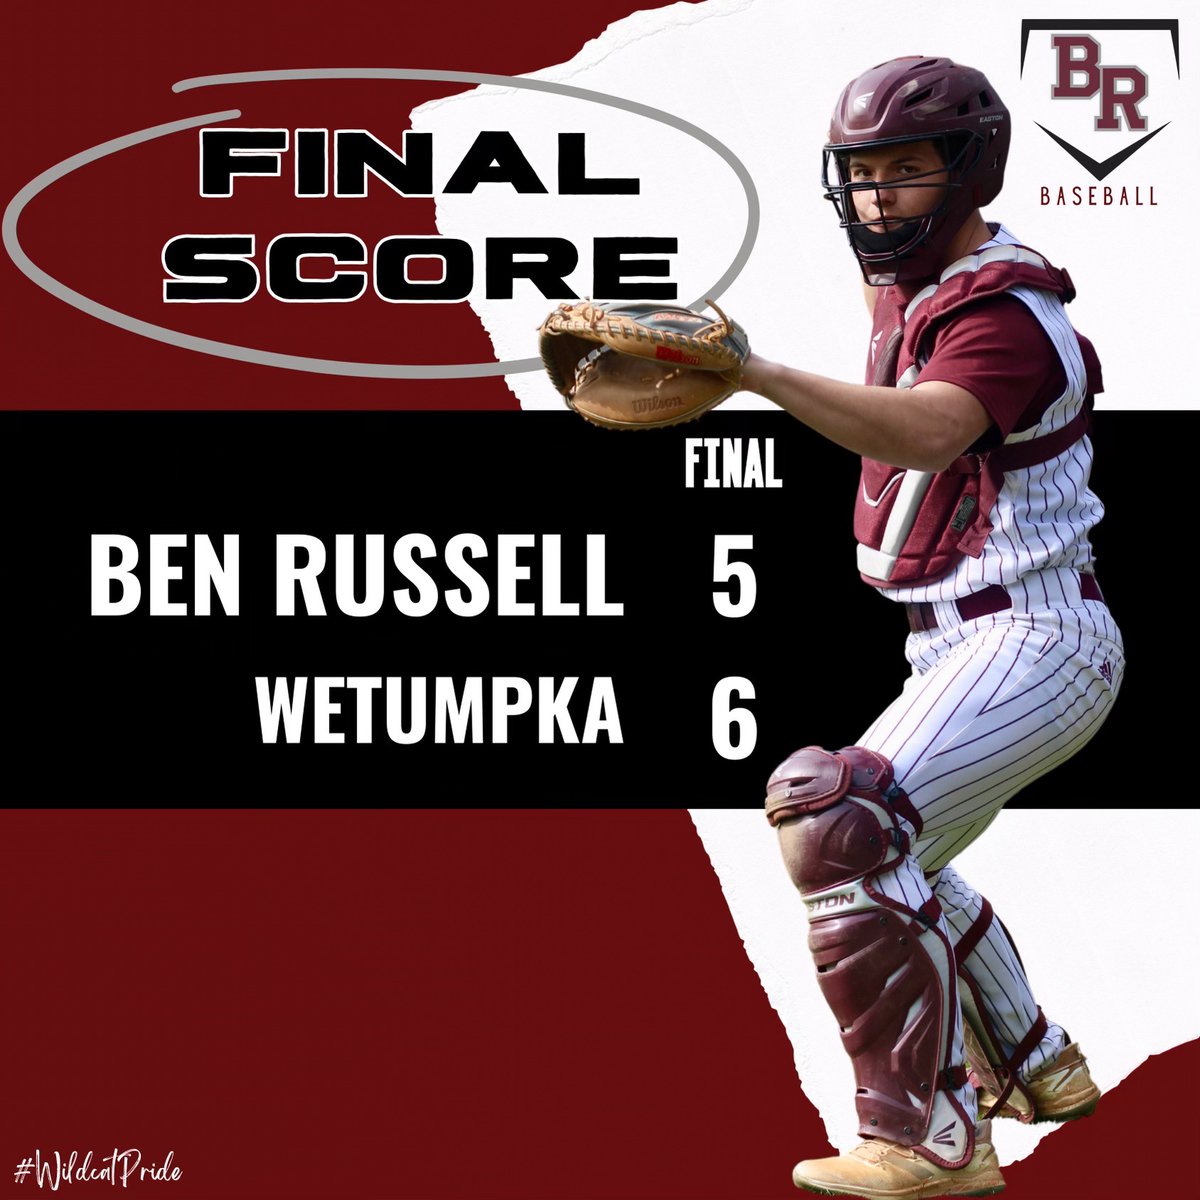 The Wildcats drop the series to Wetumpka to finish 18-11 on the year. Thank you to our seniors for a great four years, you will be missed! #WERBR | #WildcatPride